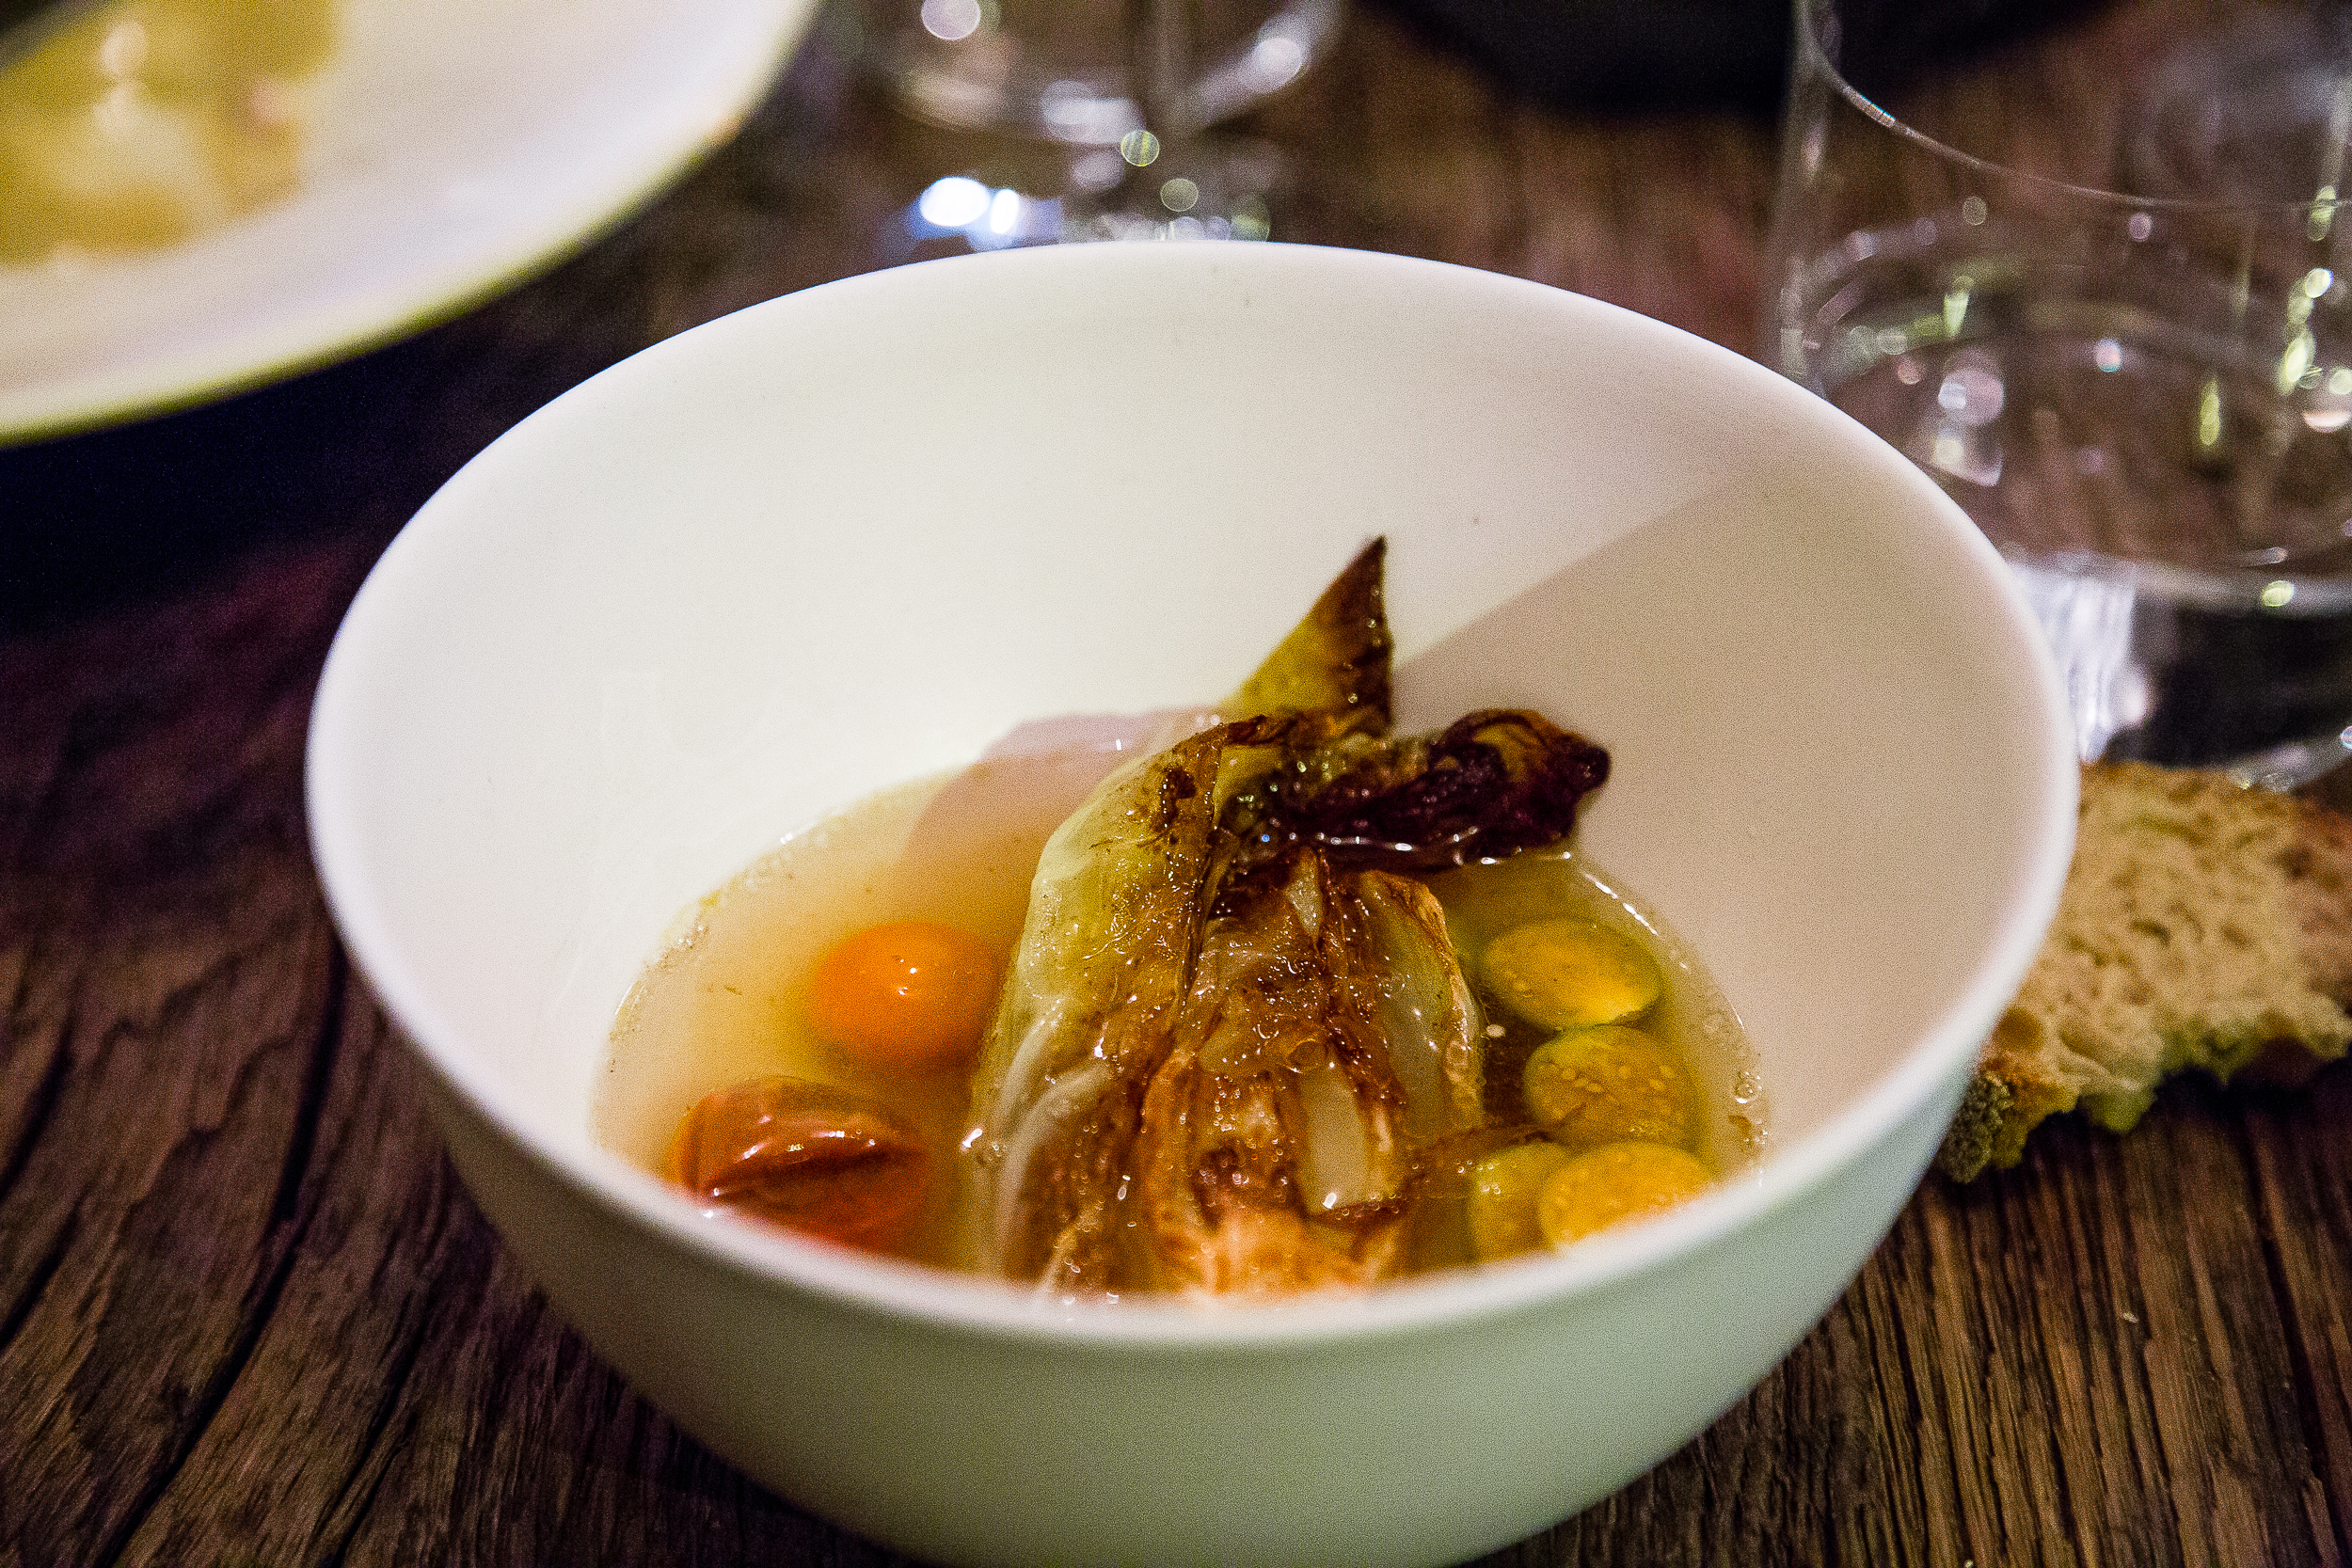 Grilled Cabbage with Tomato Consommé